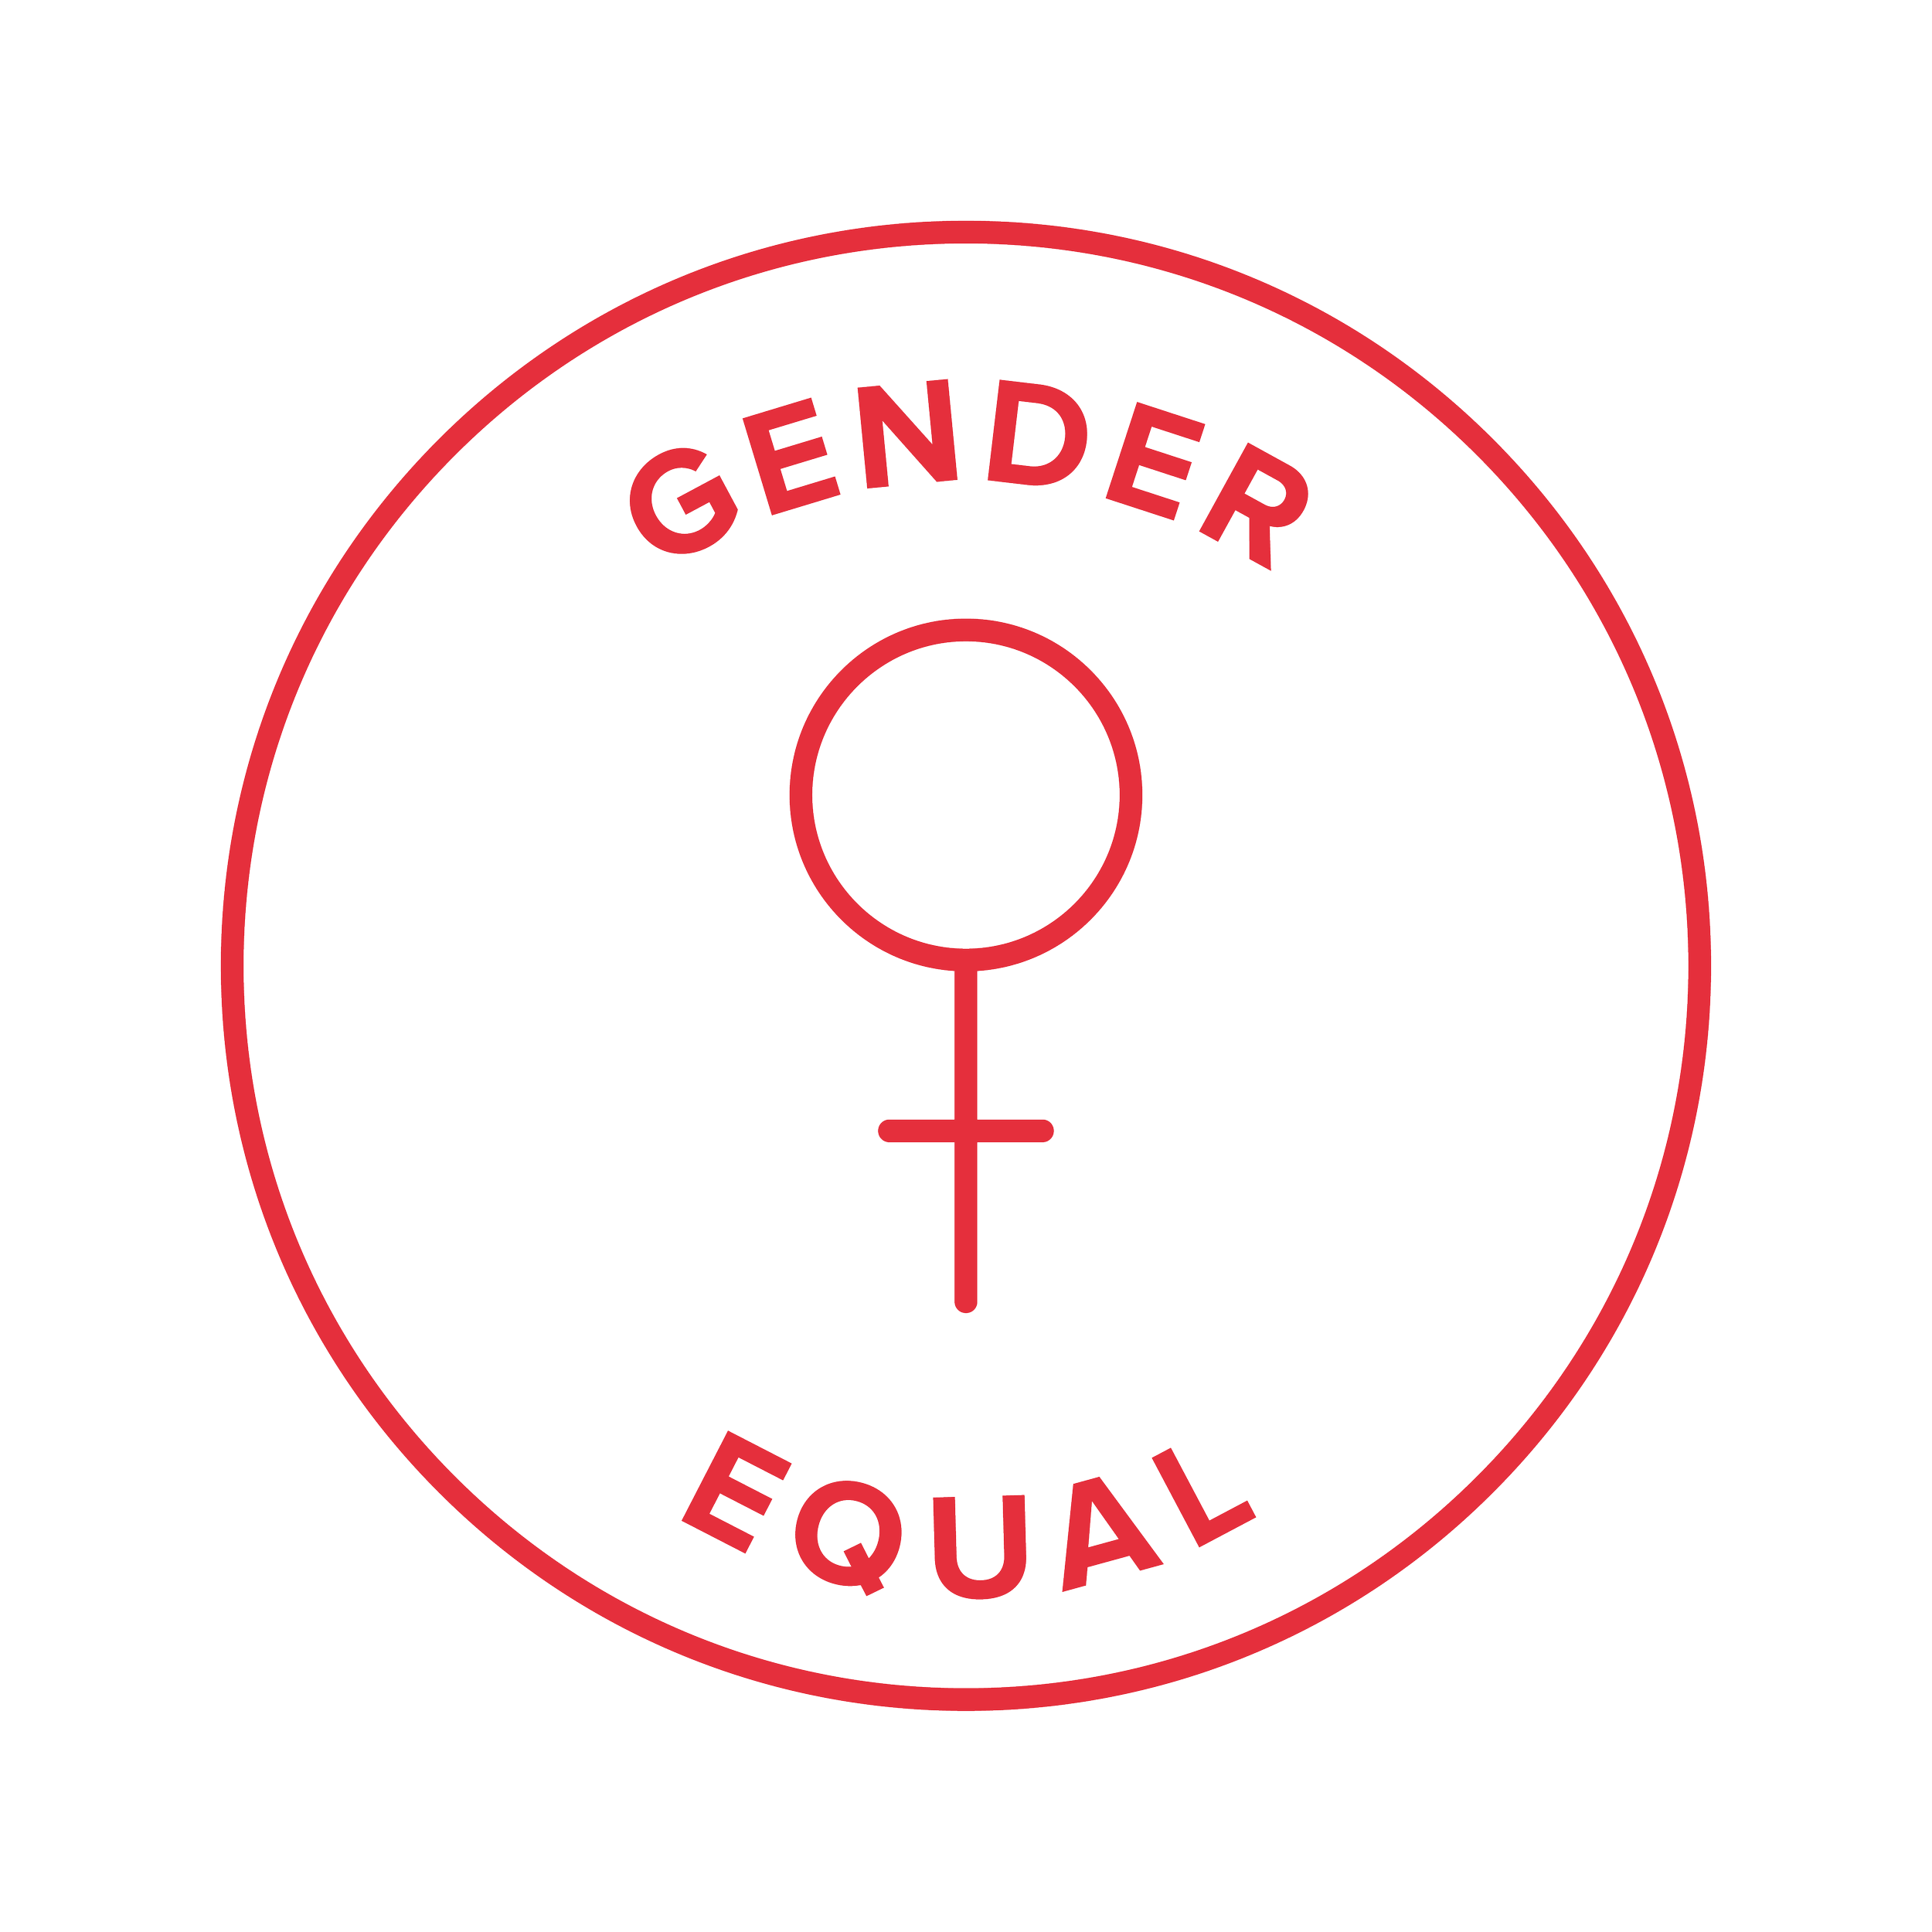 fair_good-values-icon-7-gender-equal.png